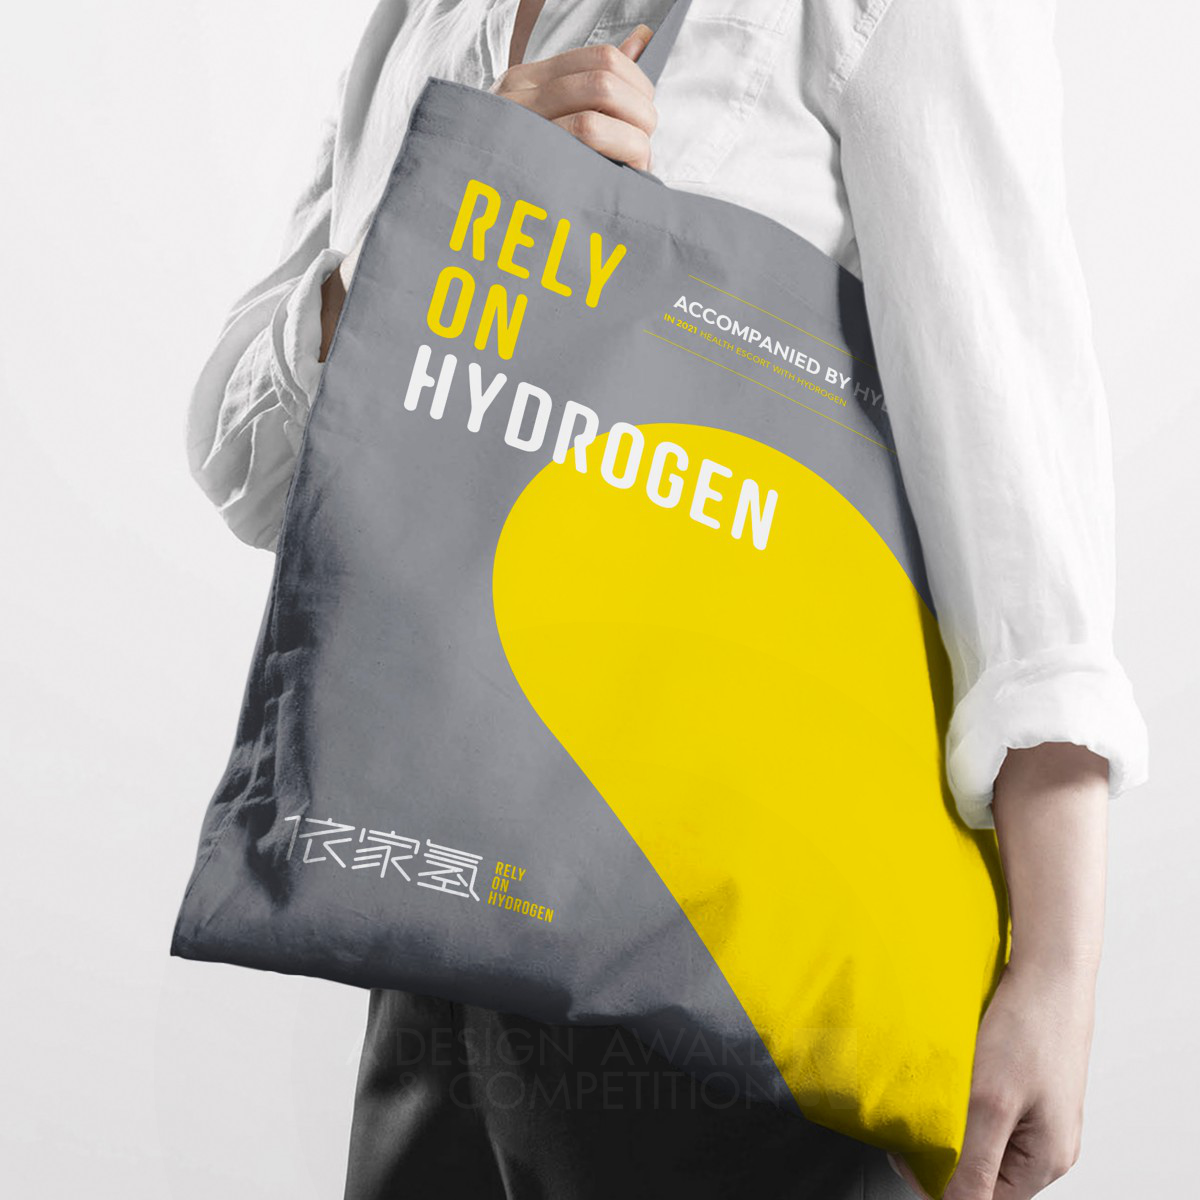 Guangzhou Cheung Ying Design Co., Ltd. wins Bronze at the prestigious A' Graphics, Illustration and Visual Communication Design Award with Rely on Hydrogen Corporate Identity.